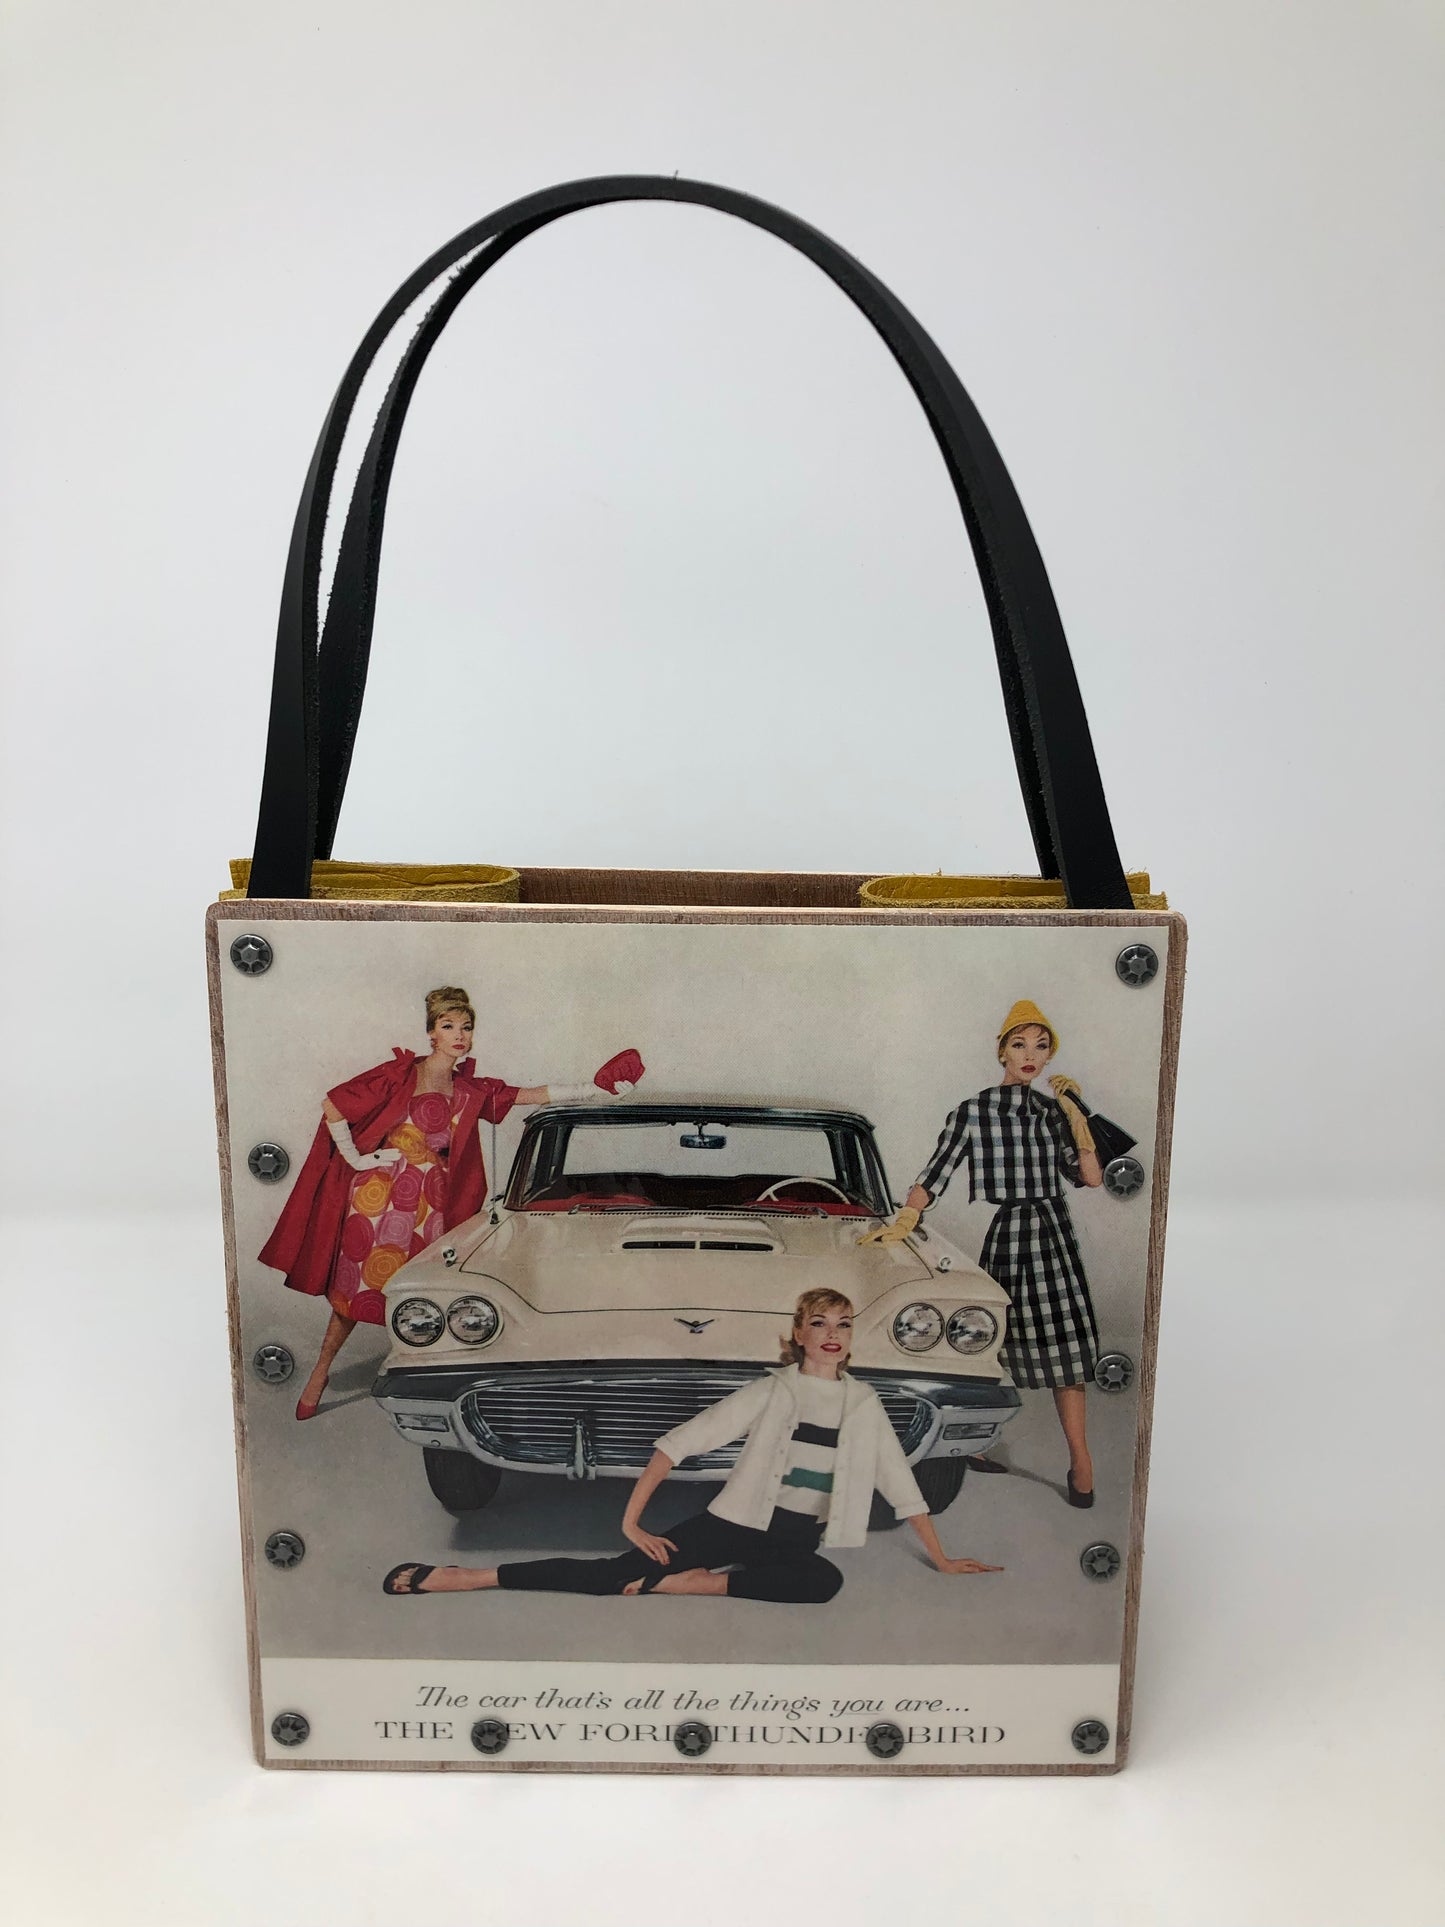 Vintage Graphics Handbag - Ford Thunderbird and Tiffany & Co. Ads from Vogue 1959